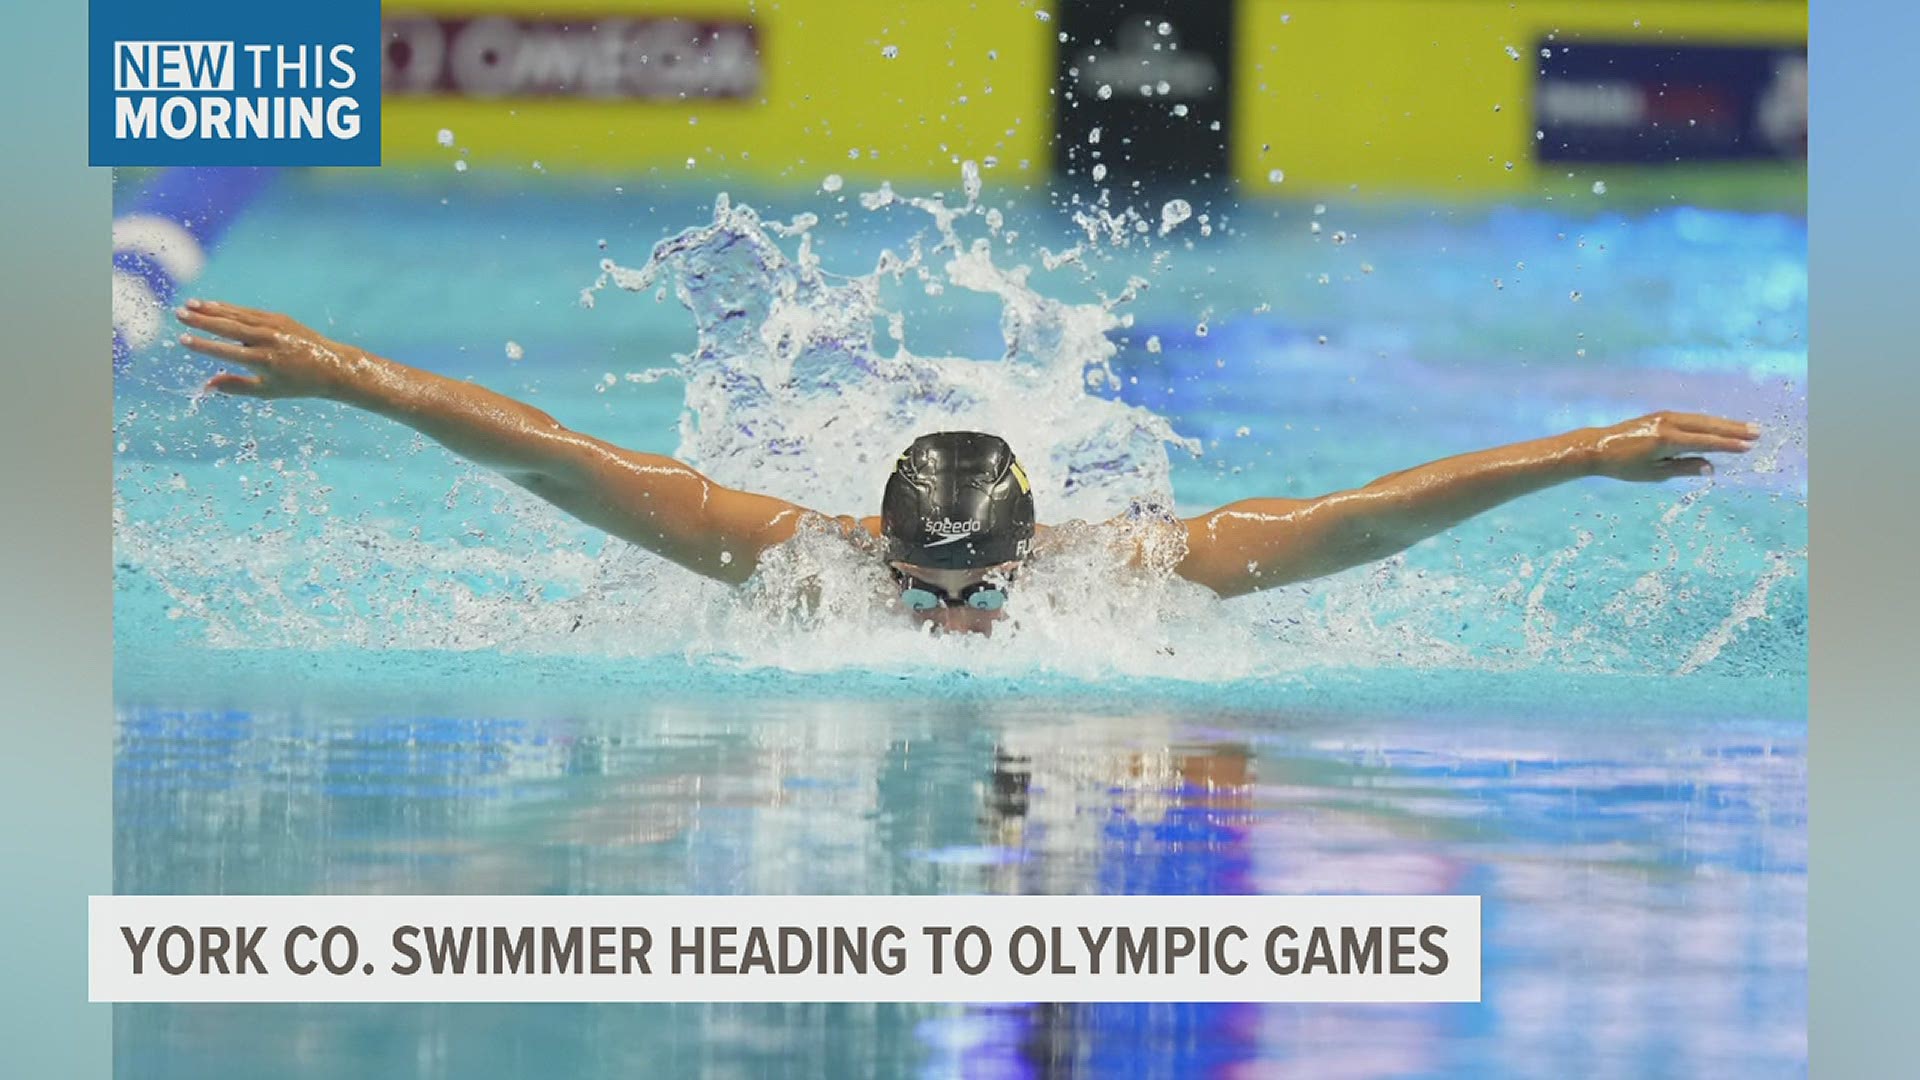 Flickinger, a 26-year-old Spring Grove graduate, will swim at her second consecutive Olympic games.